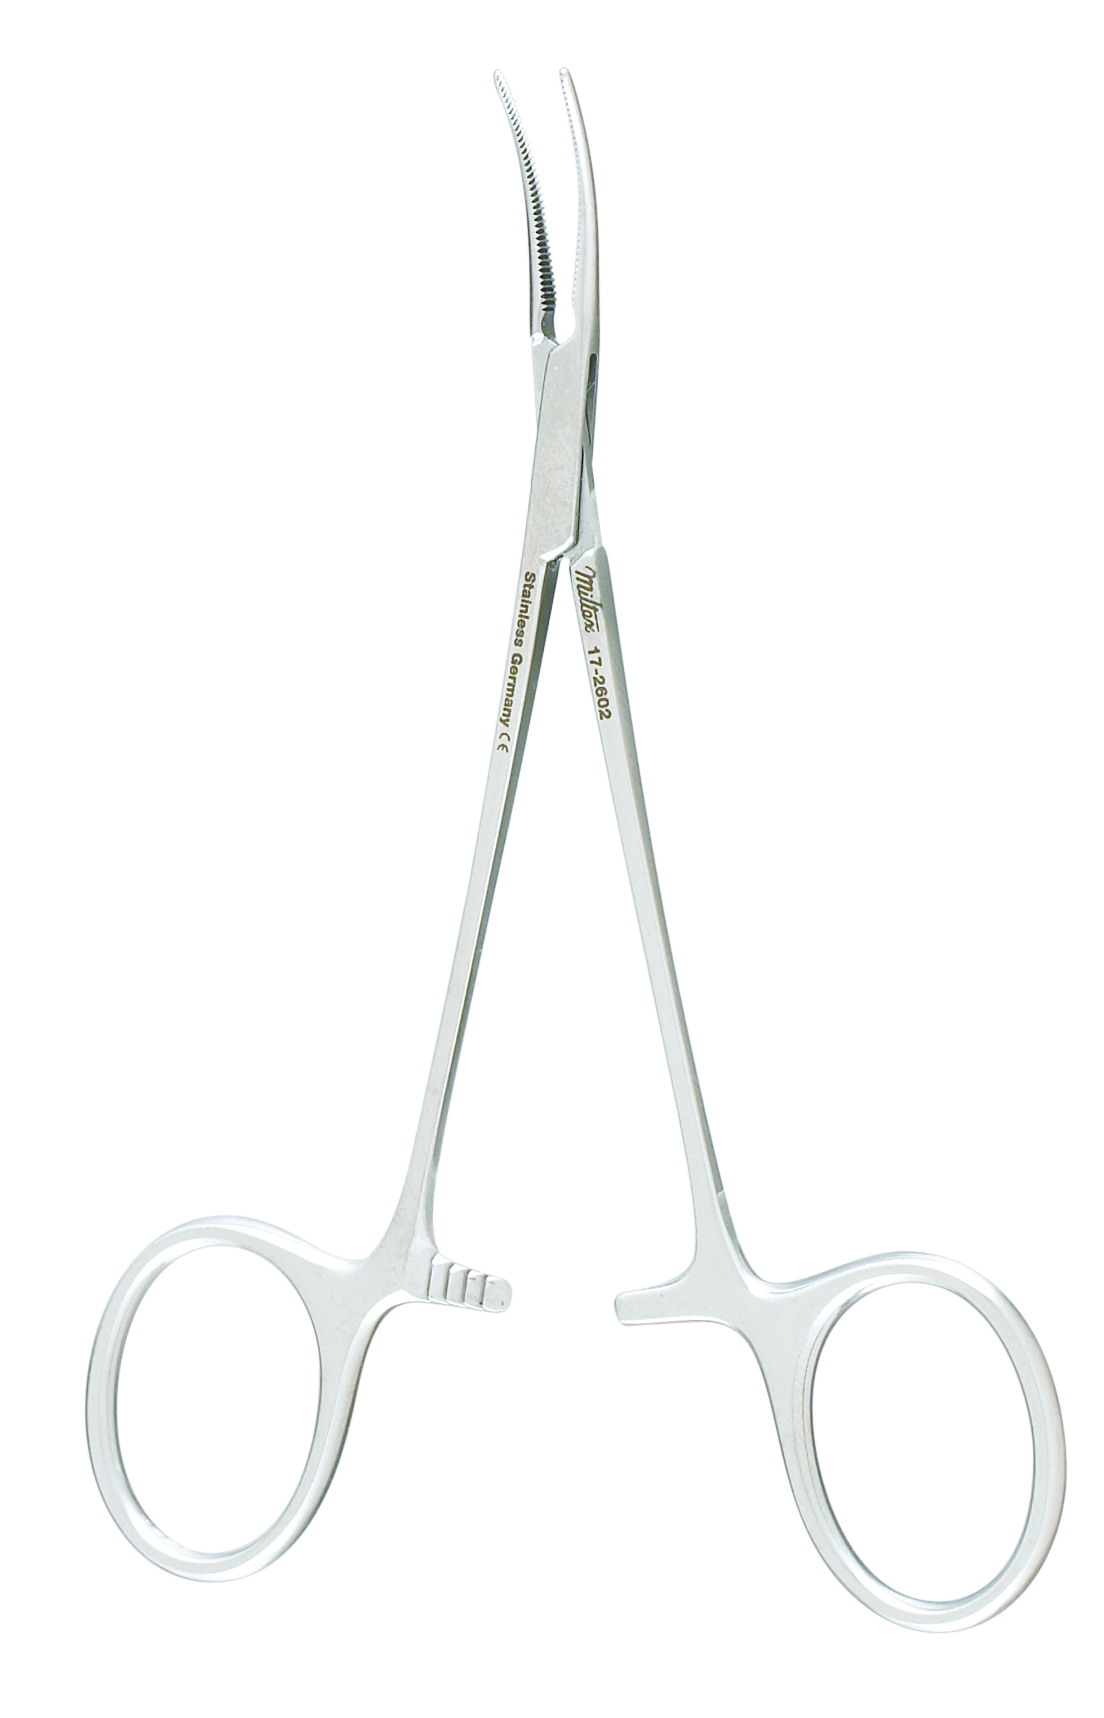 jacobson-micro-mosquito-forceps-curved-extremely-delicate-17-2602-miltex.jpg